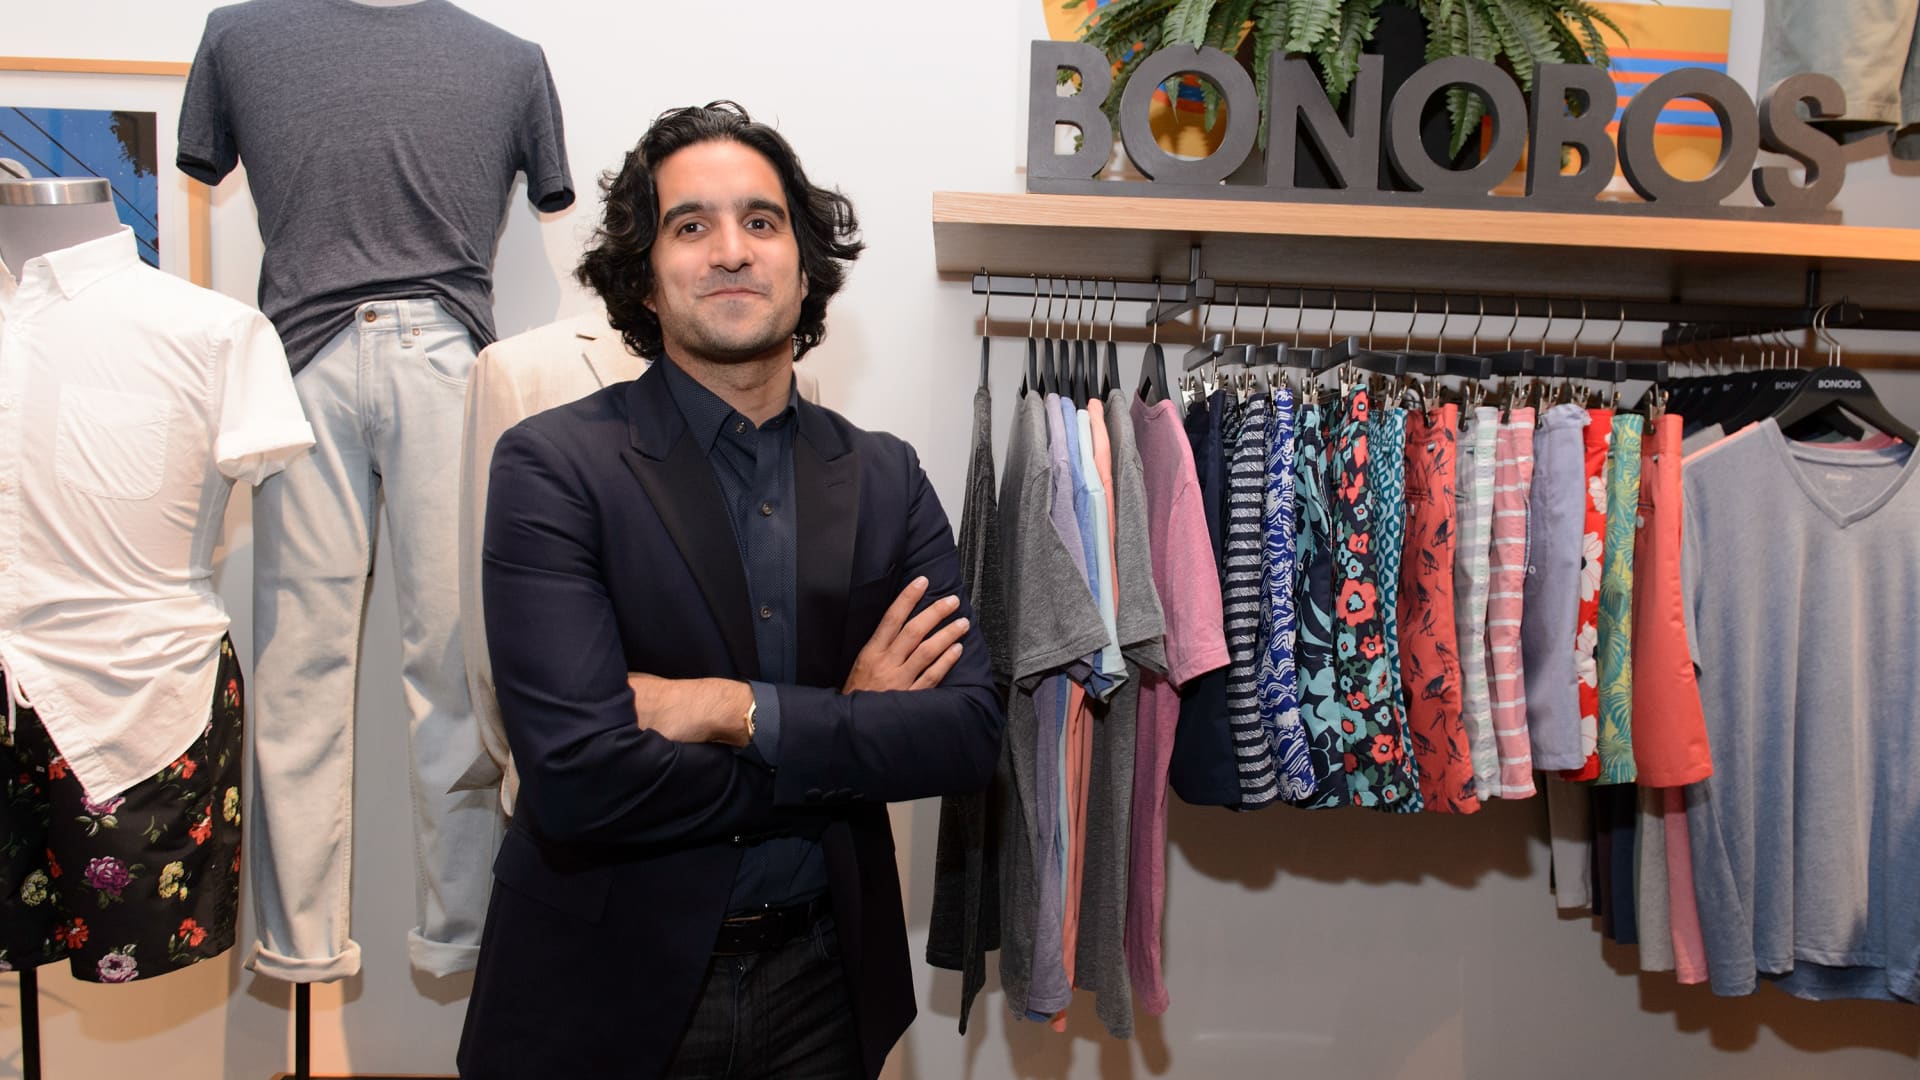 ‘Shedding my mind’: Bonobos founder who helped transform Walmart opens up about psychological neatly being struggles